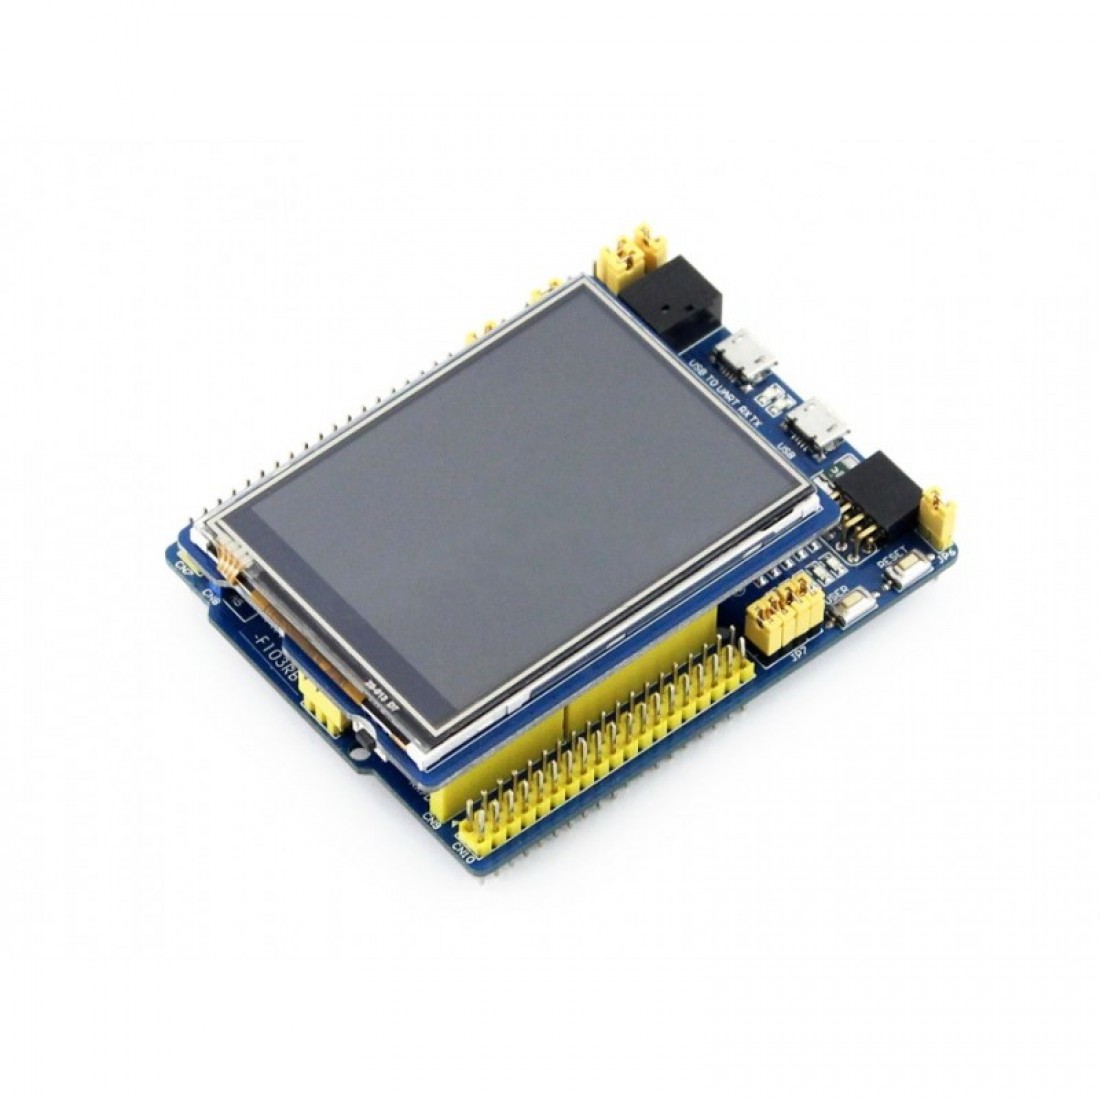 Tft shield. 2.8 TFT LCD Shield. 2.8Inch TFT Touch Shield, TFT дисплей 320×240px. 2.8" TFT LCD Touch Screen. TFT-дисплей 2.8 дюймов.